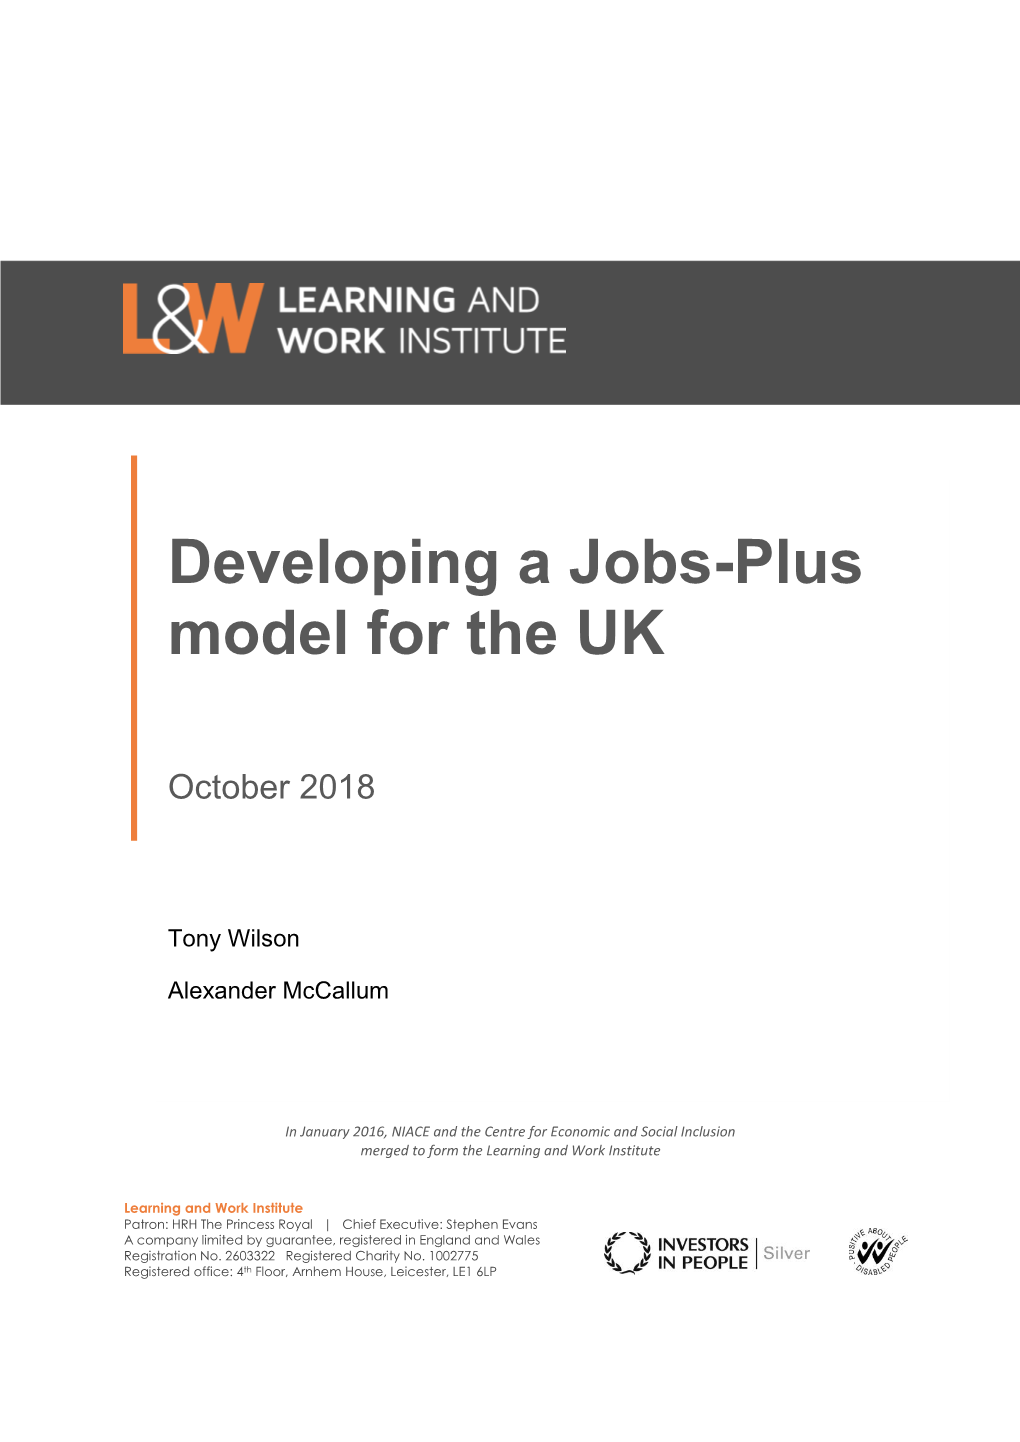 Developing a Jobs-Plus Model for the UK